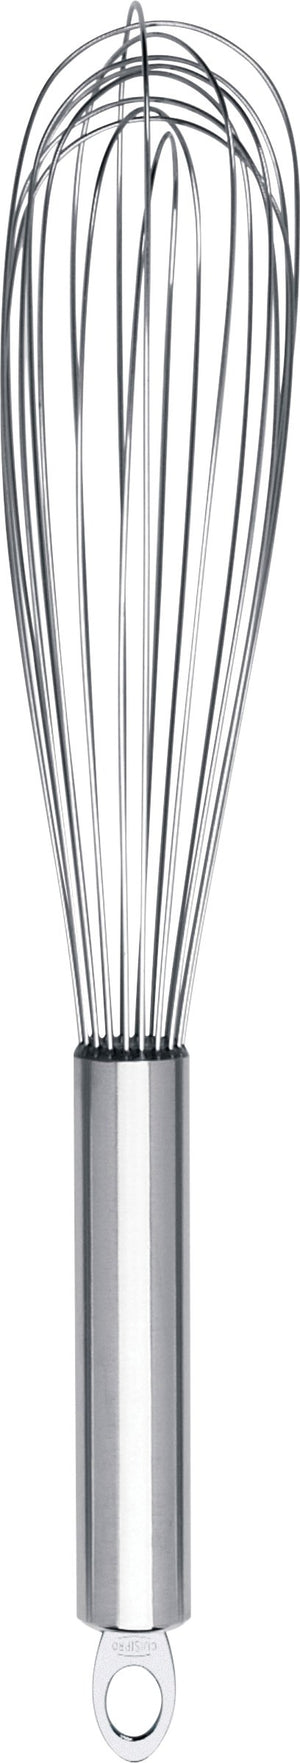 Cuisipro - 10" Stainless Steel Egg Whisk (10 Wires) - 74767099